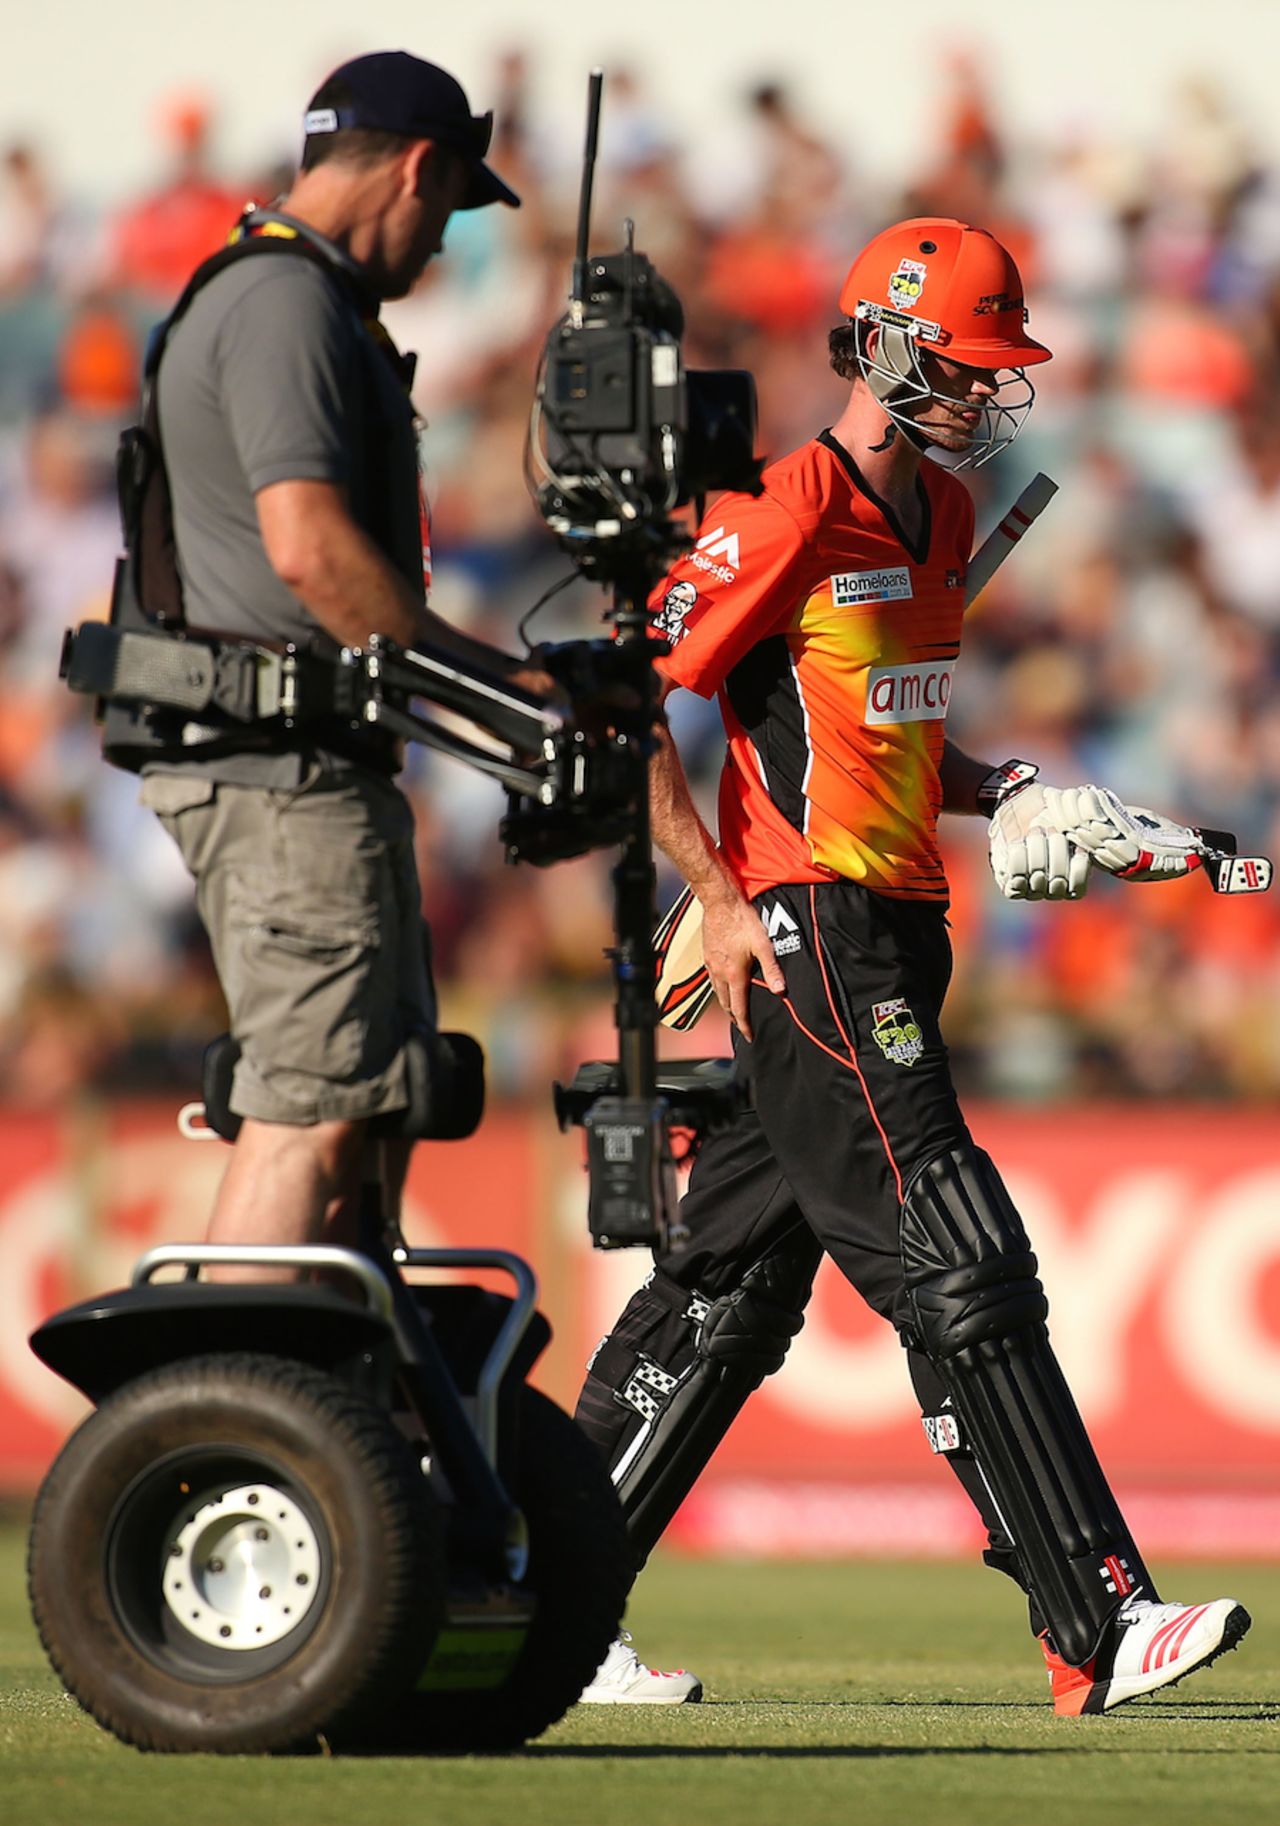 Ashton Turner is followed by a cameraman on a segway, Perth Scorchers v Adelaide Strikers, Big Bash League 2014-15, Perth, December 22, 2014